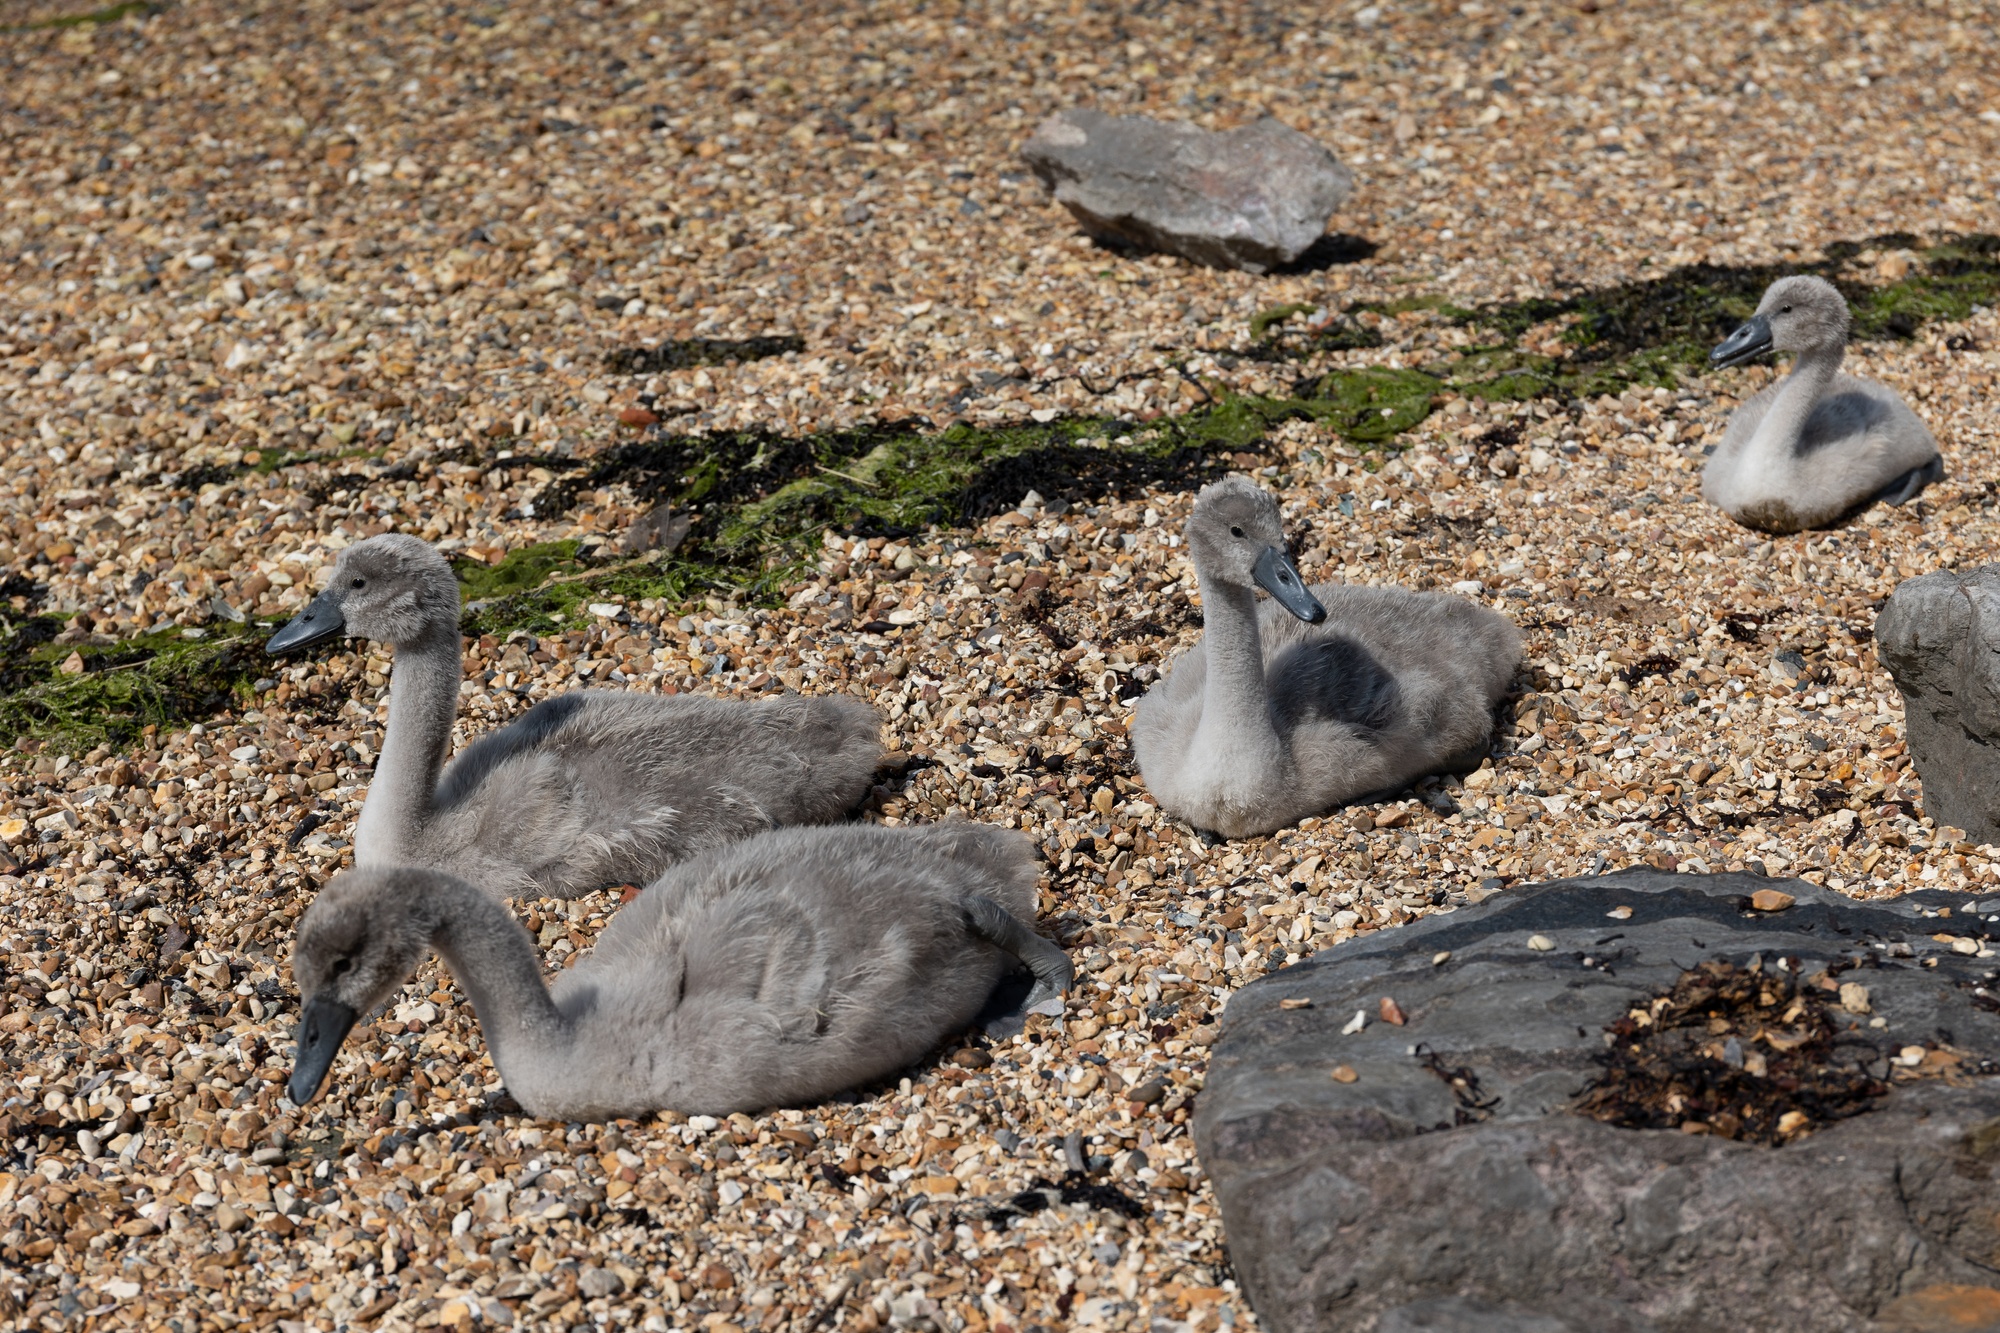 A group of cygnets sittong on rocky beach with rocks in the foreground